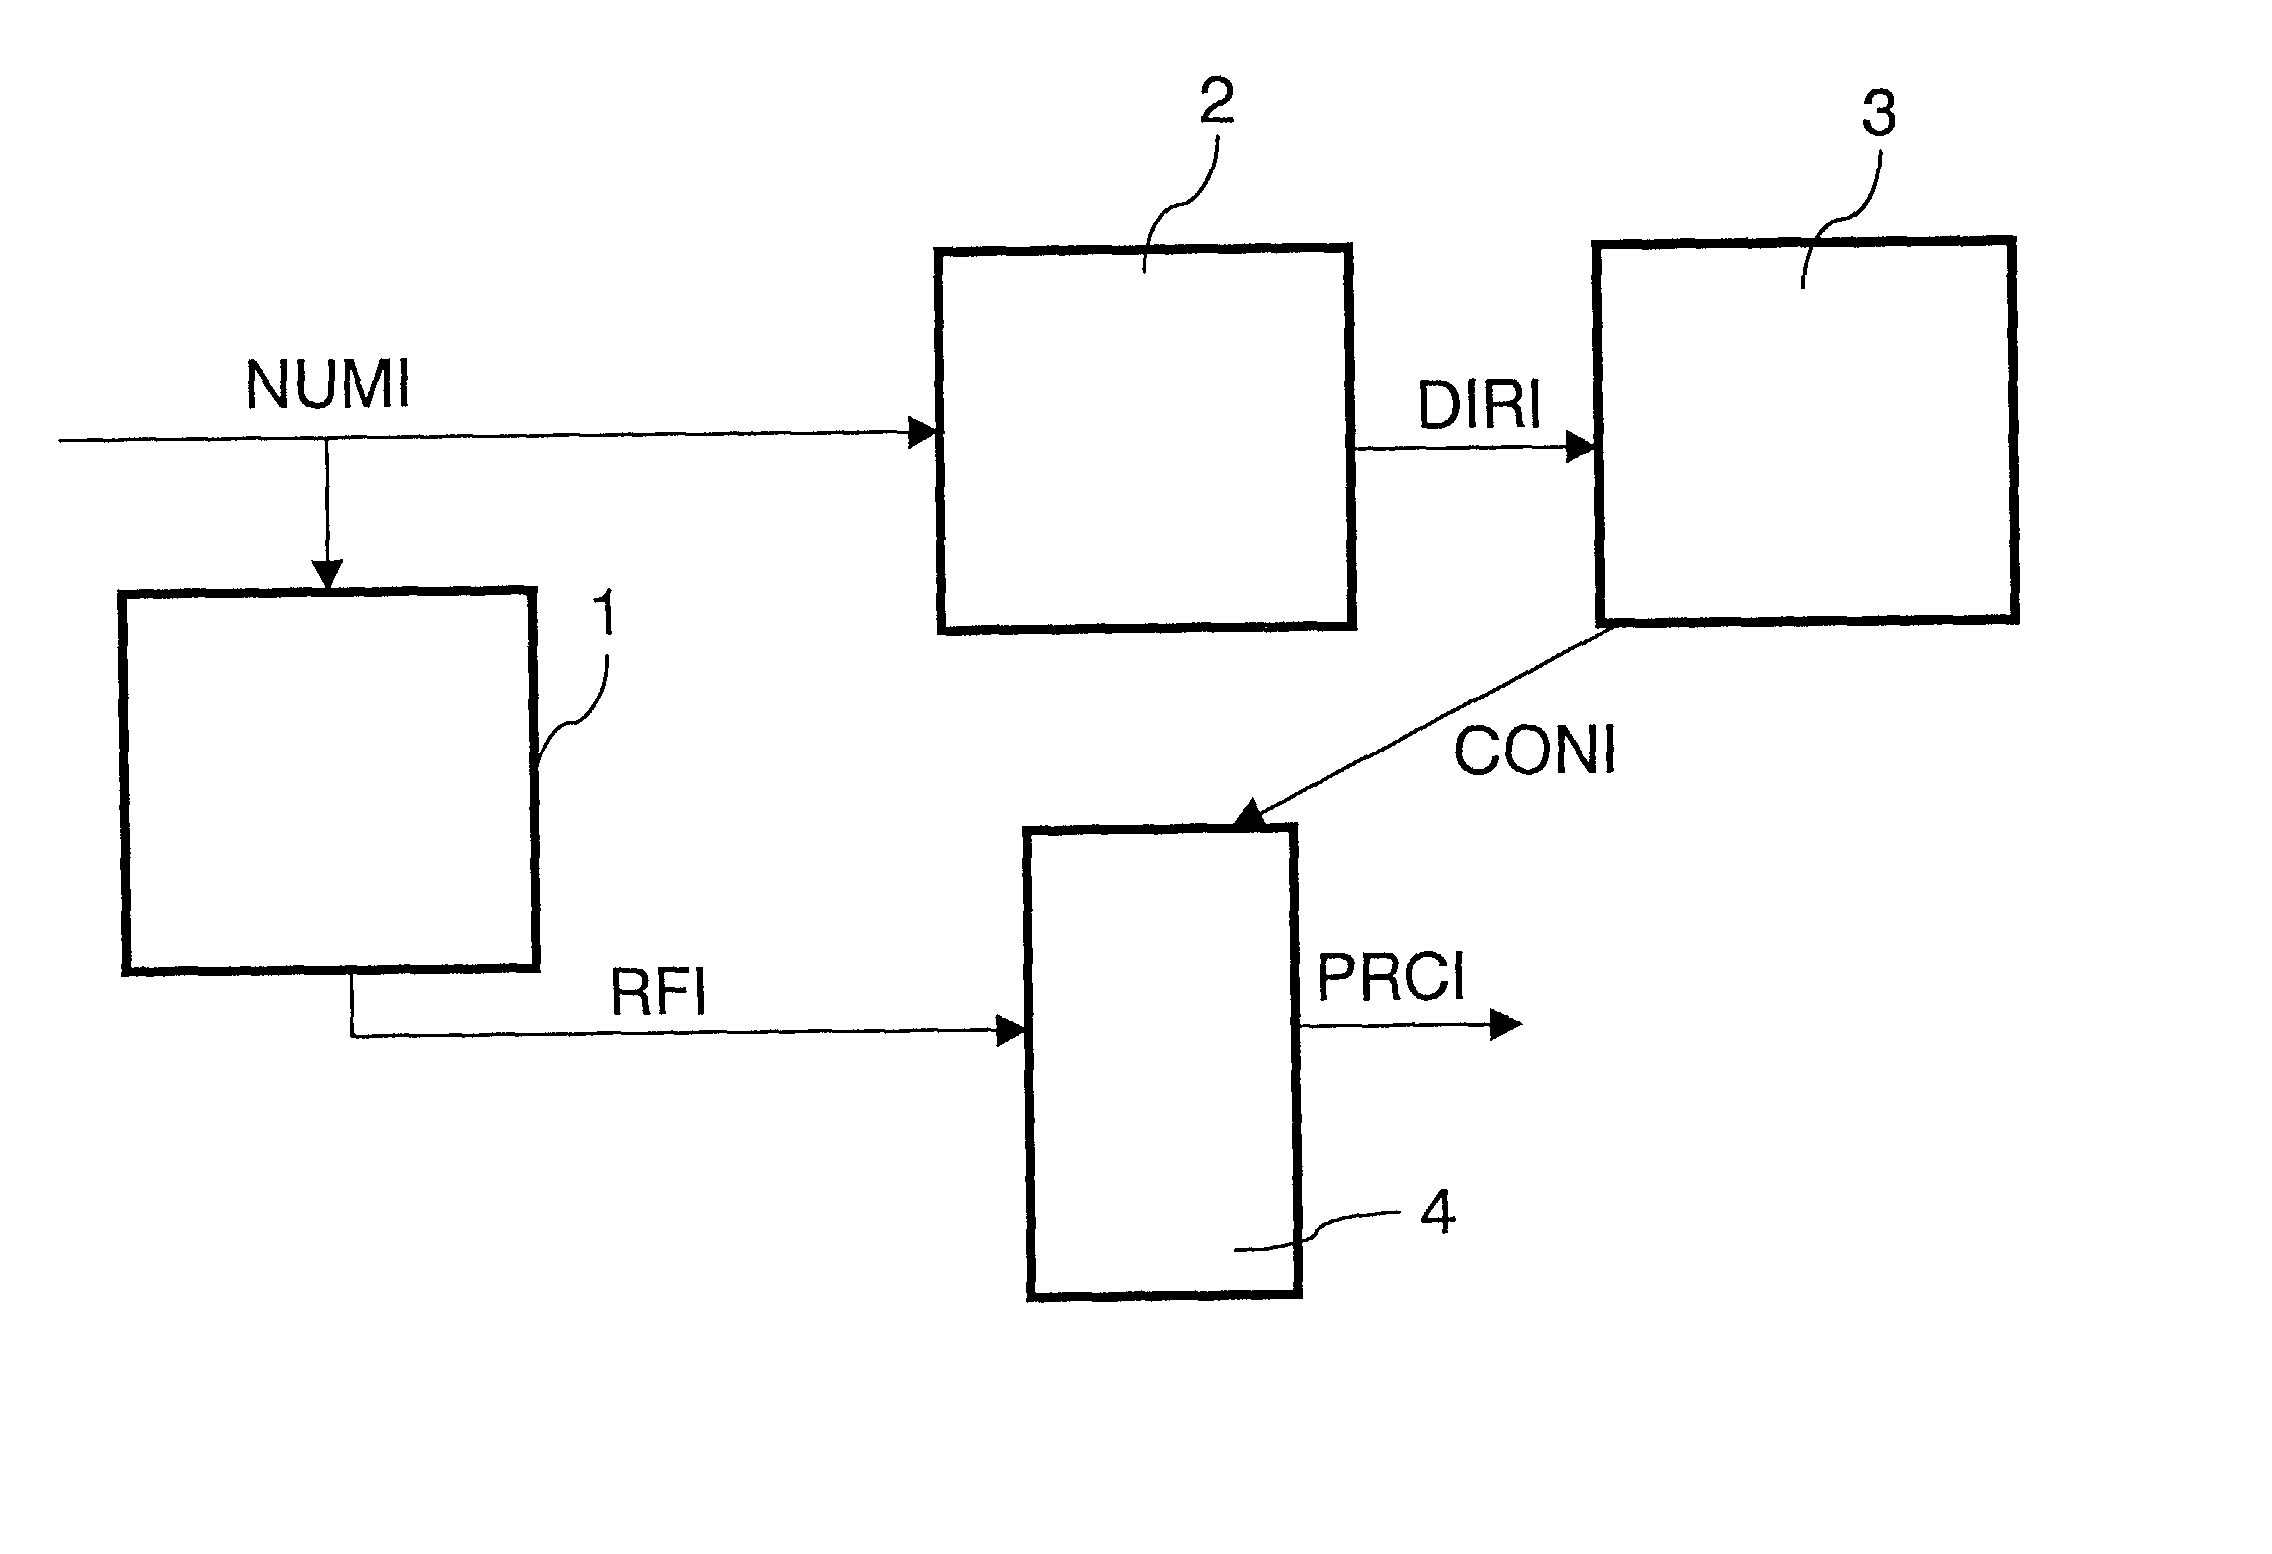 Method of processing images